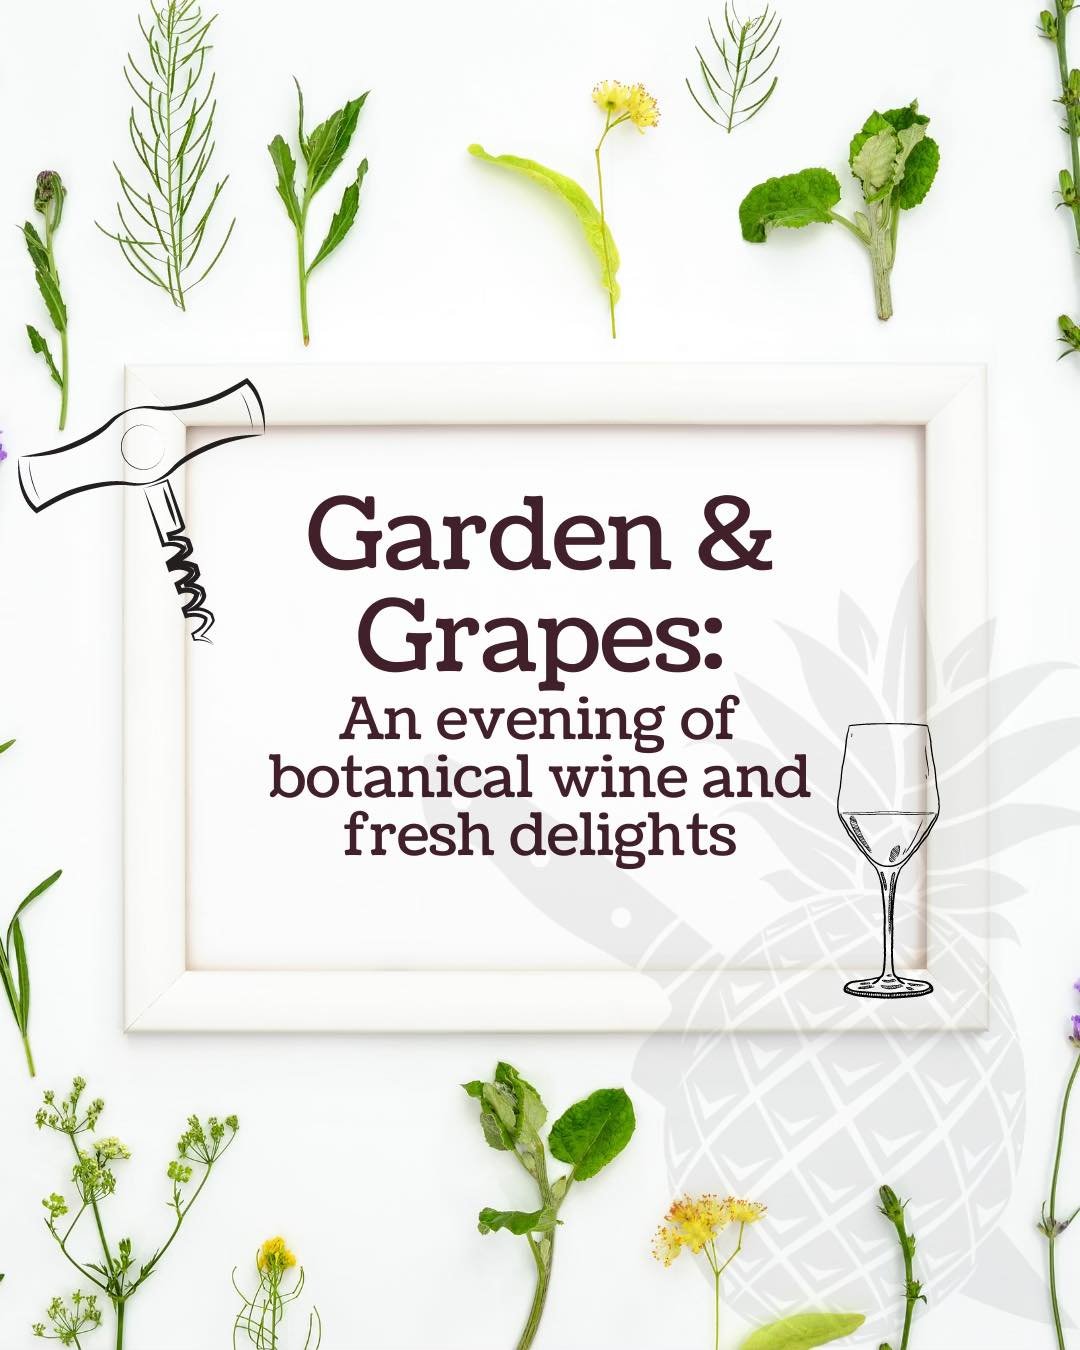 Escape to a botanical paradise with us at Pineapple Ink Tavern's 'Garden and Grapes' wine pairing dinner! 🌿🍇 Join us for an evening of exquisite wines and fresh delights. It&rsquo;s May 29 at 7 p.m. Don't miss out &ndash; get your tickets now! 

🎟